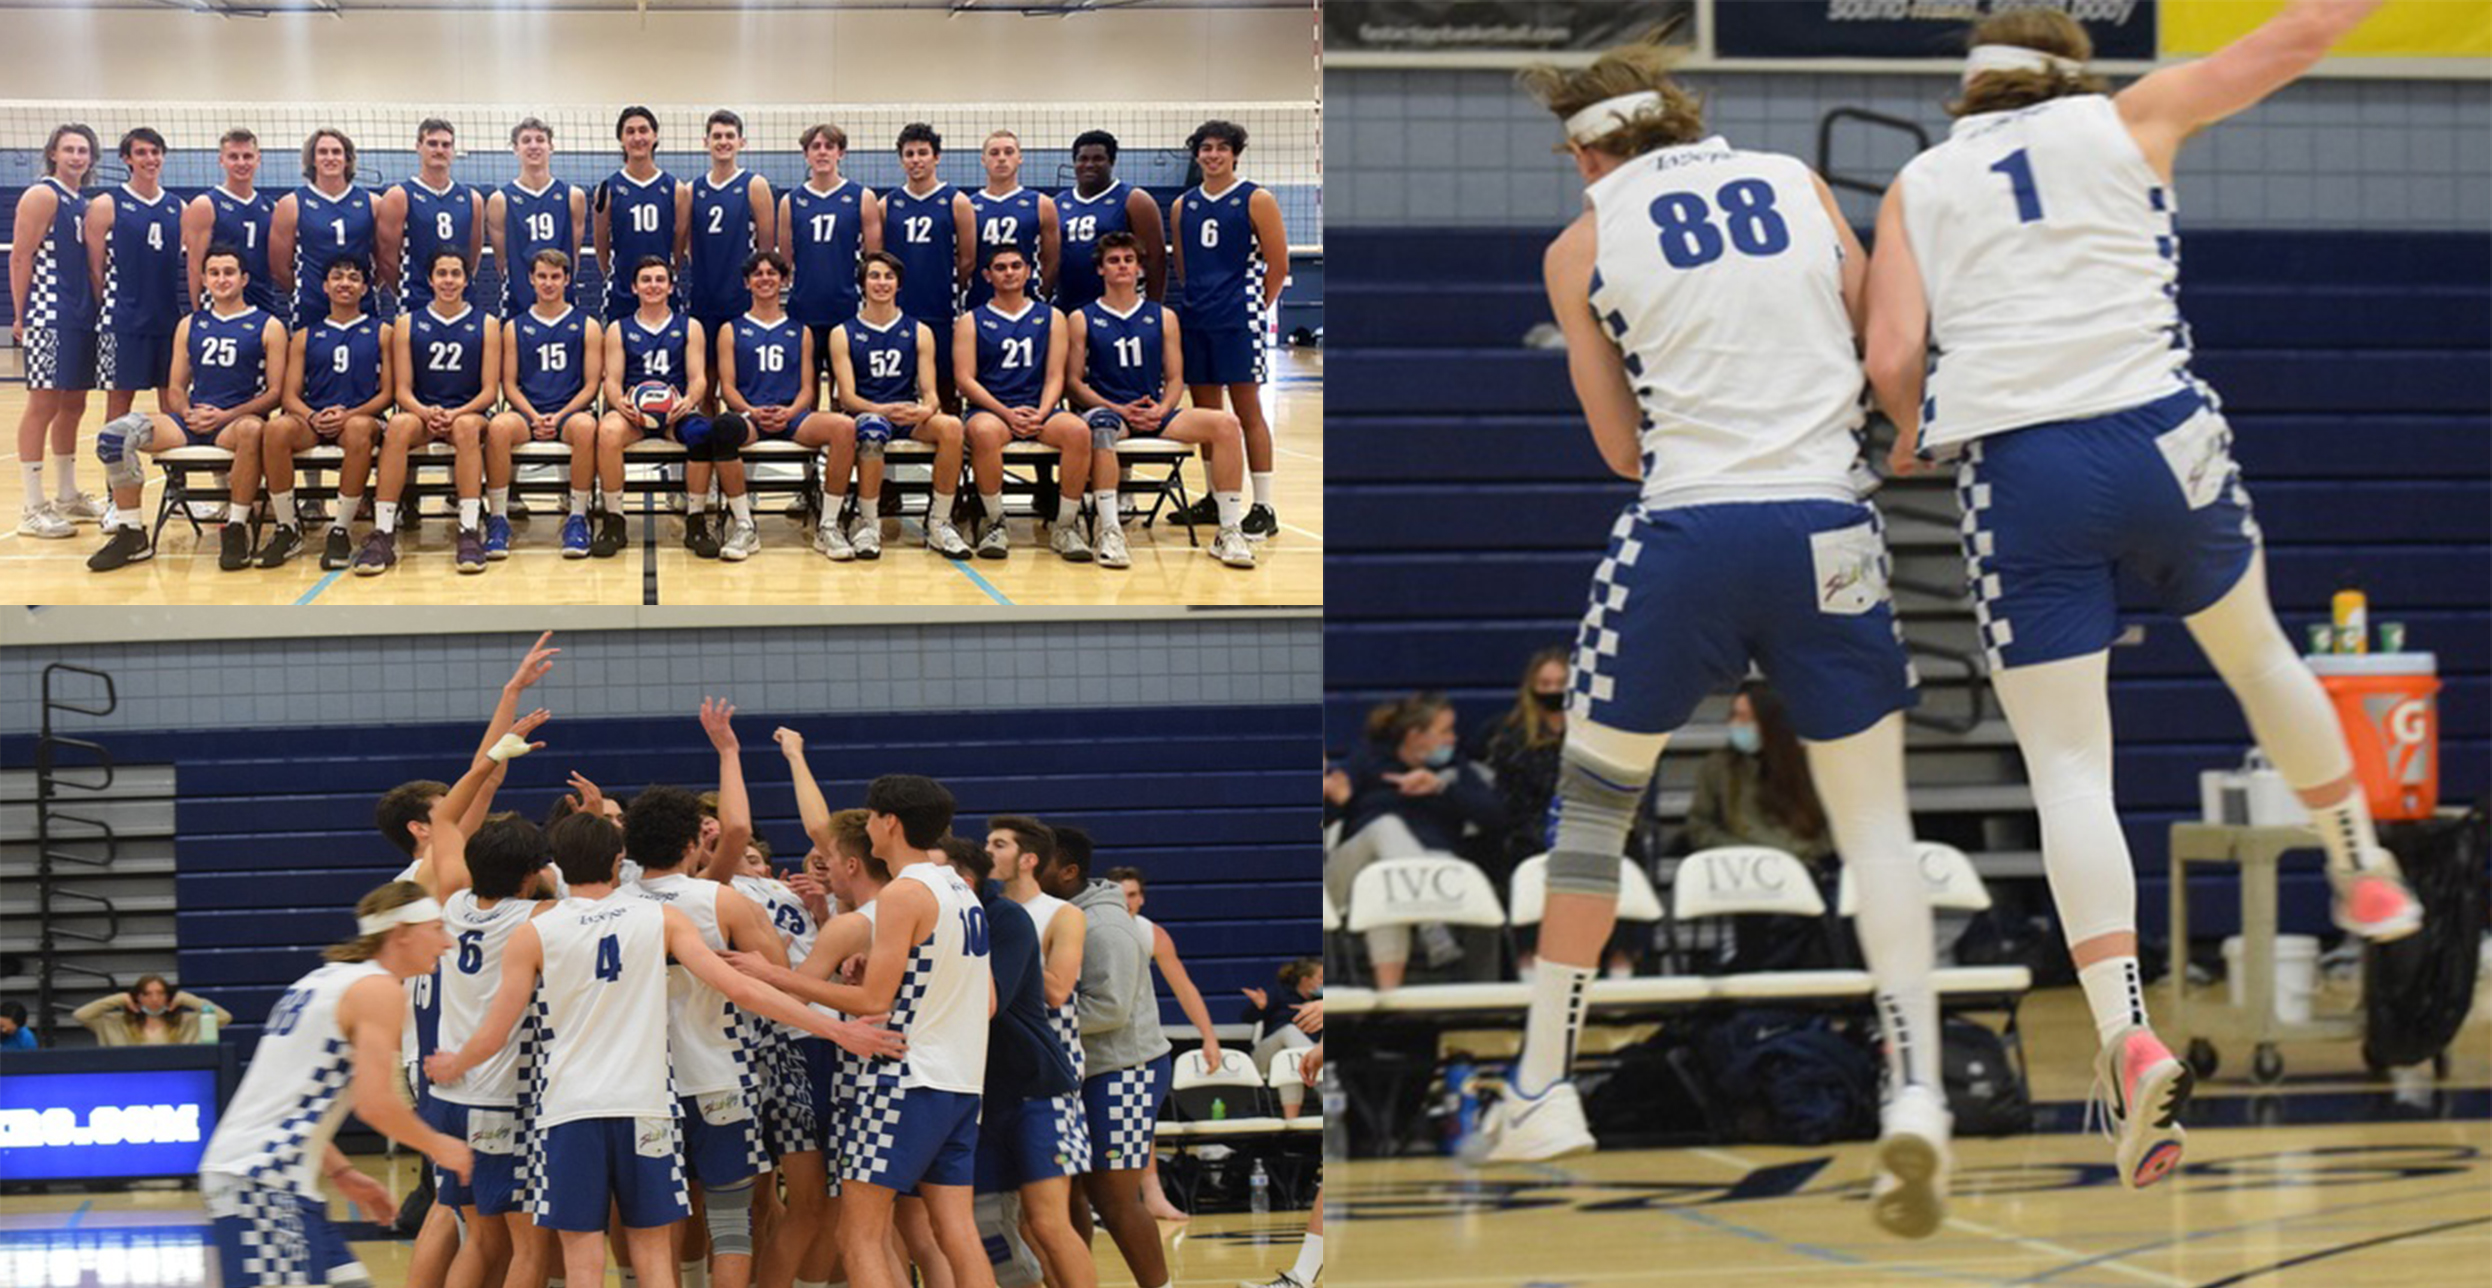 No. 8 Story of the Year - Men's volleyball has strong season